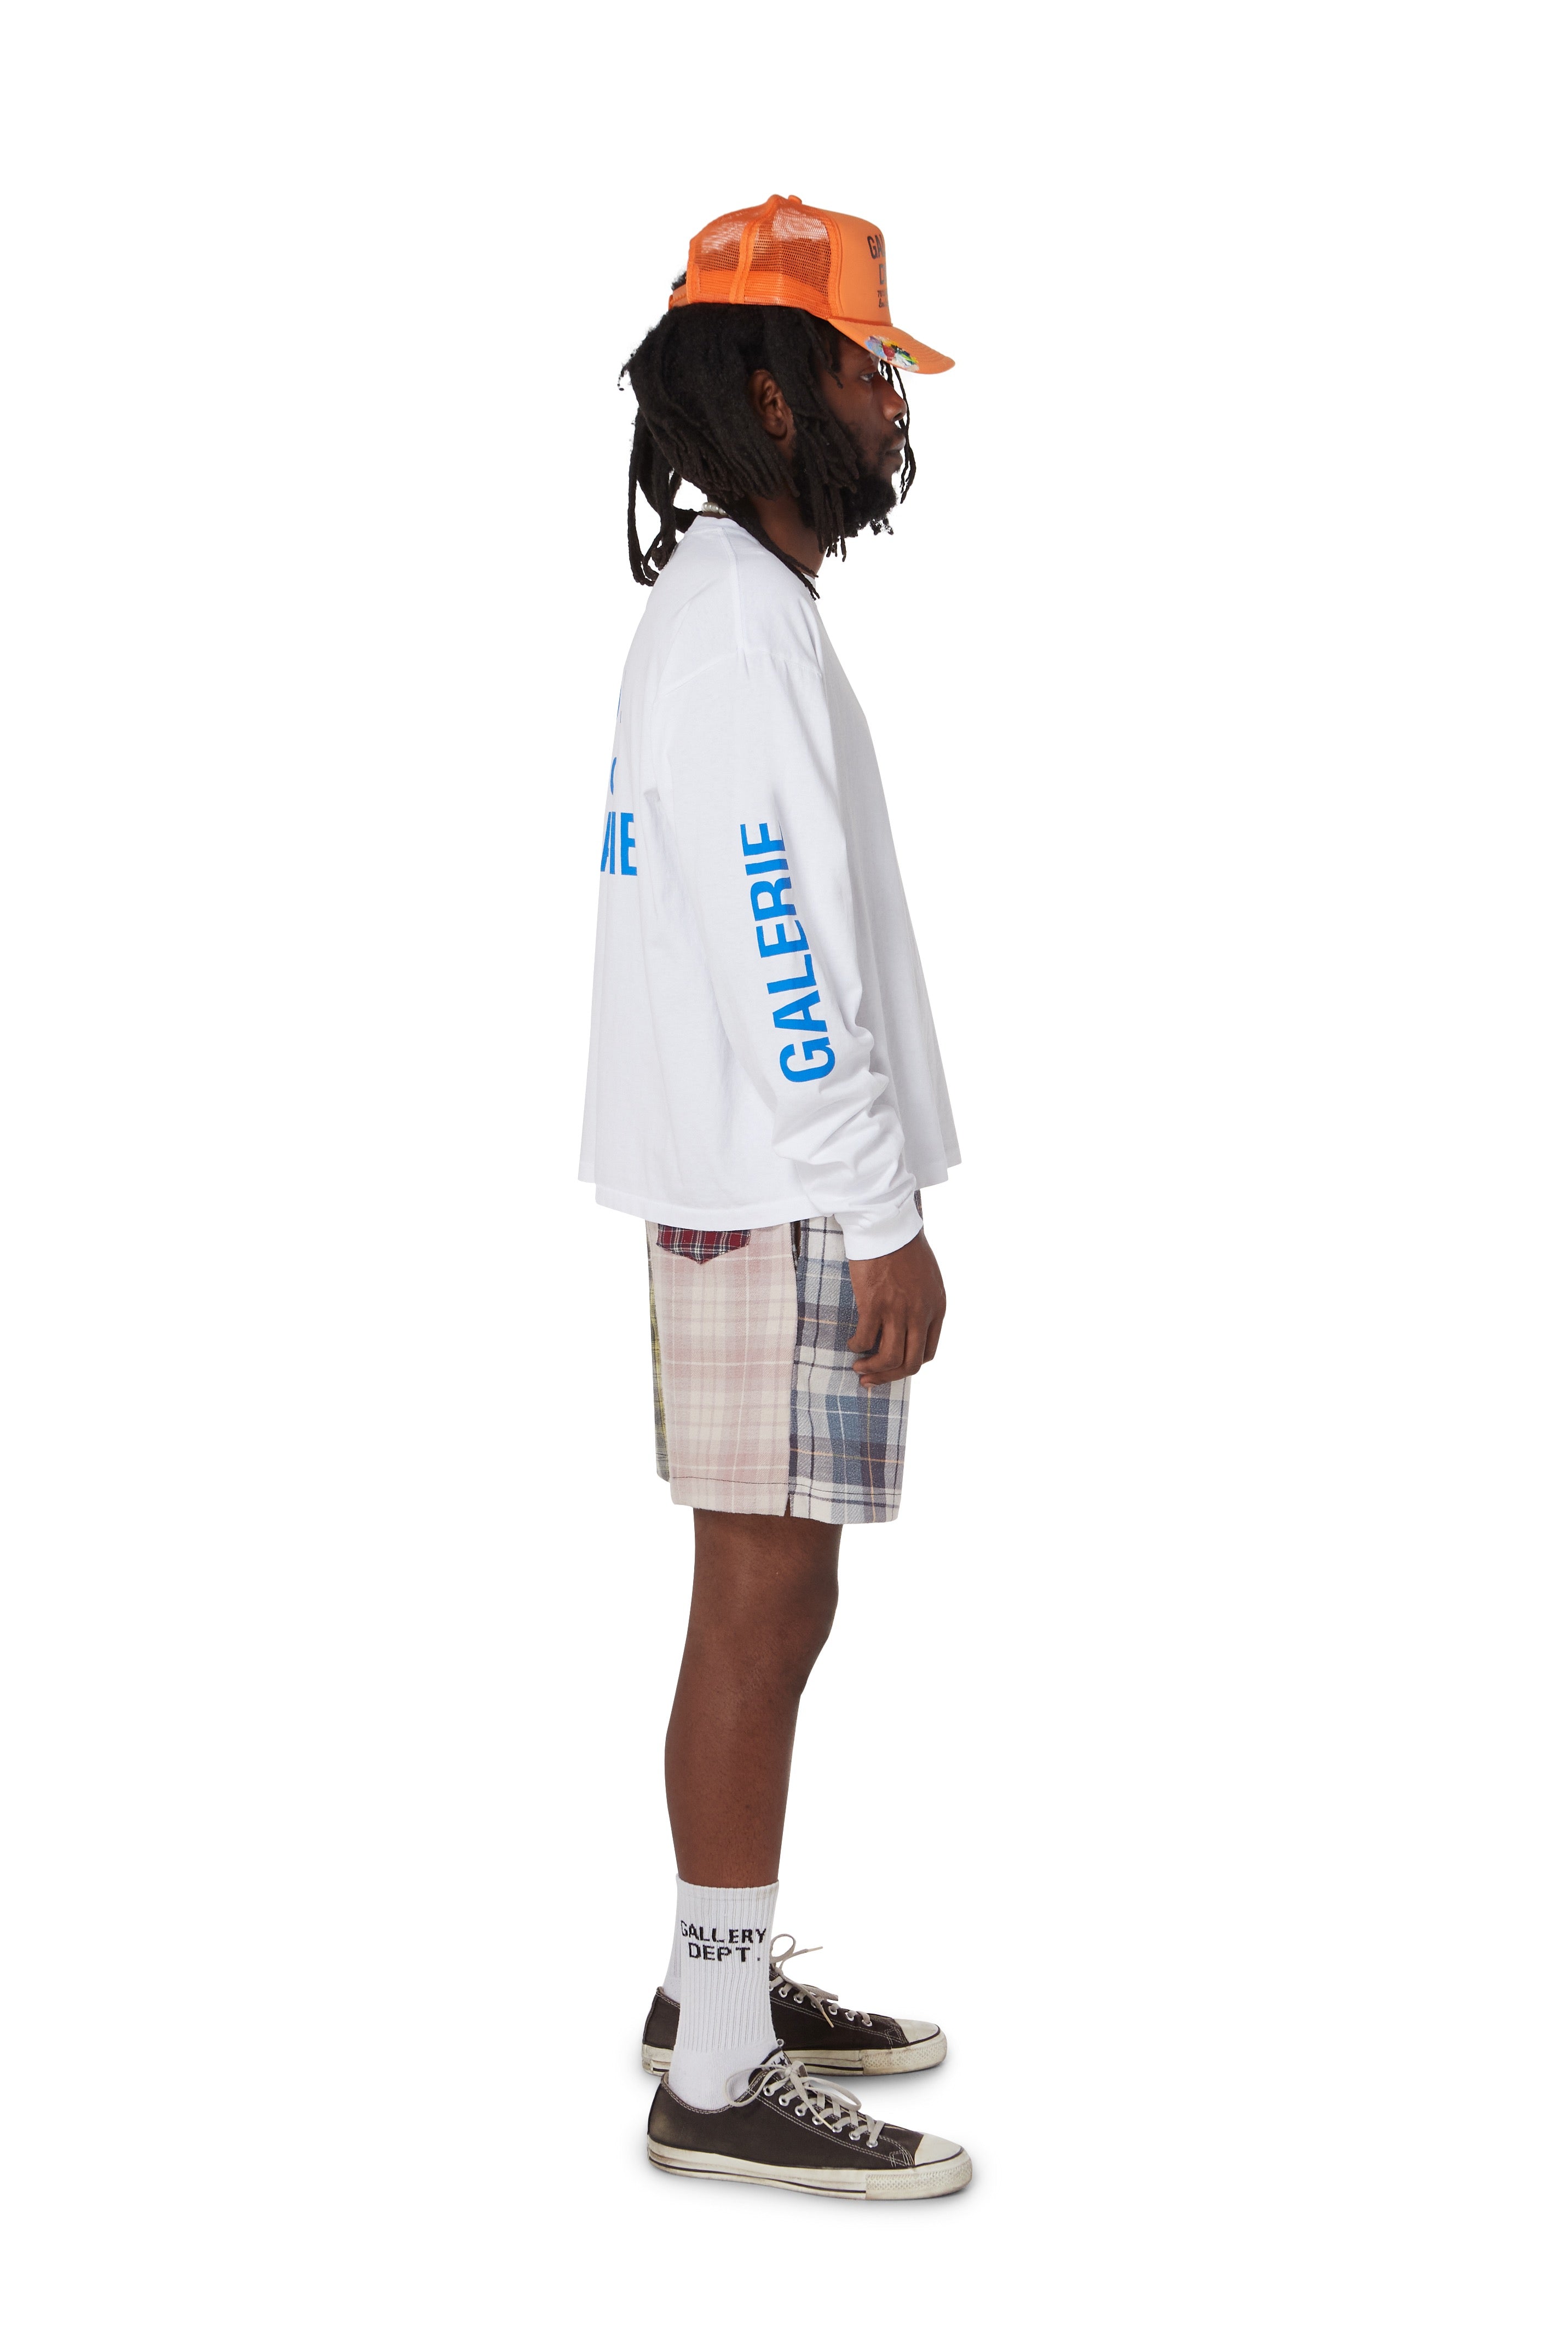 T-SHIRT Dept LONG - COLLECTOR WHITE – online FRENCH Gallery SLEEVE